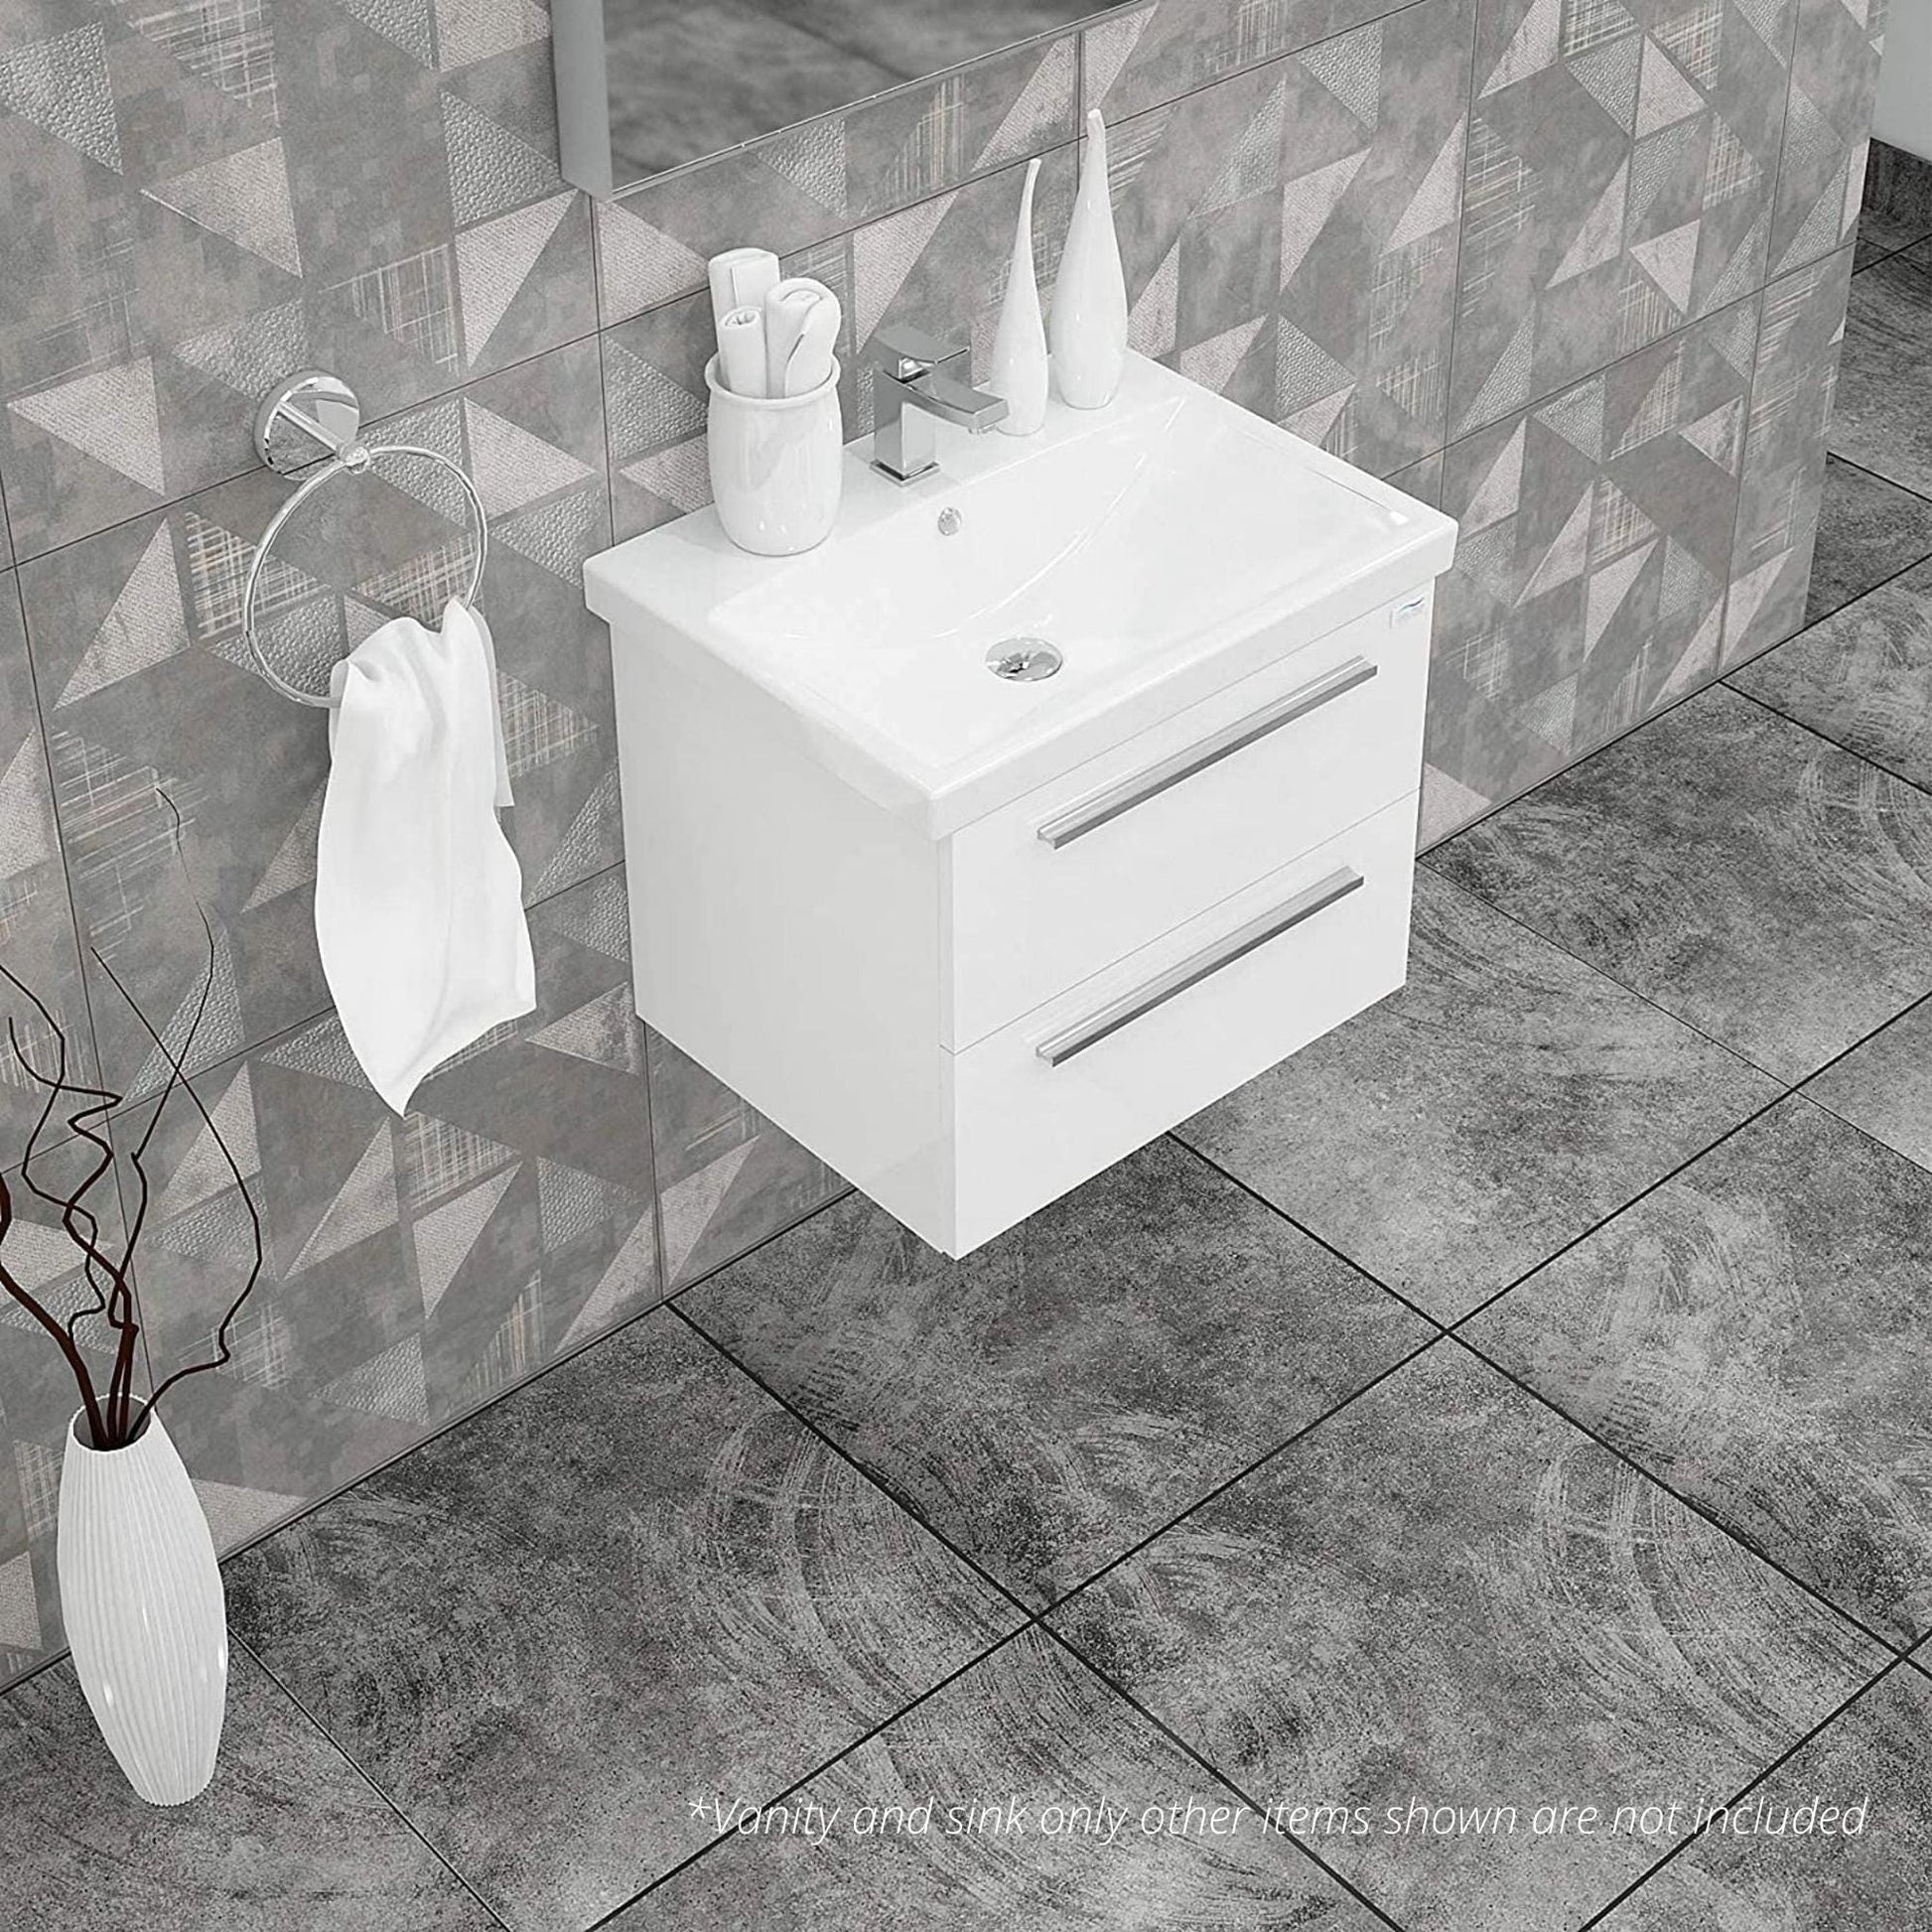 Casa Mare Elke 24" Glossy White Wall-Mounted Bathroom Vanity and Ceramic Sink Combo With LED Mirror